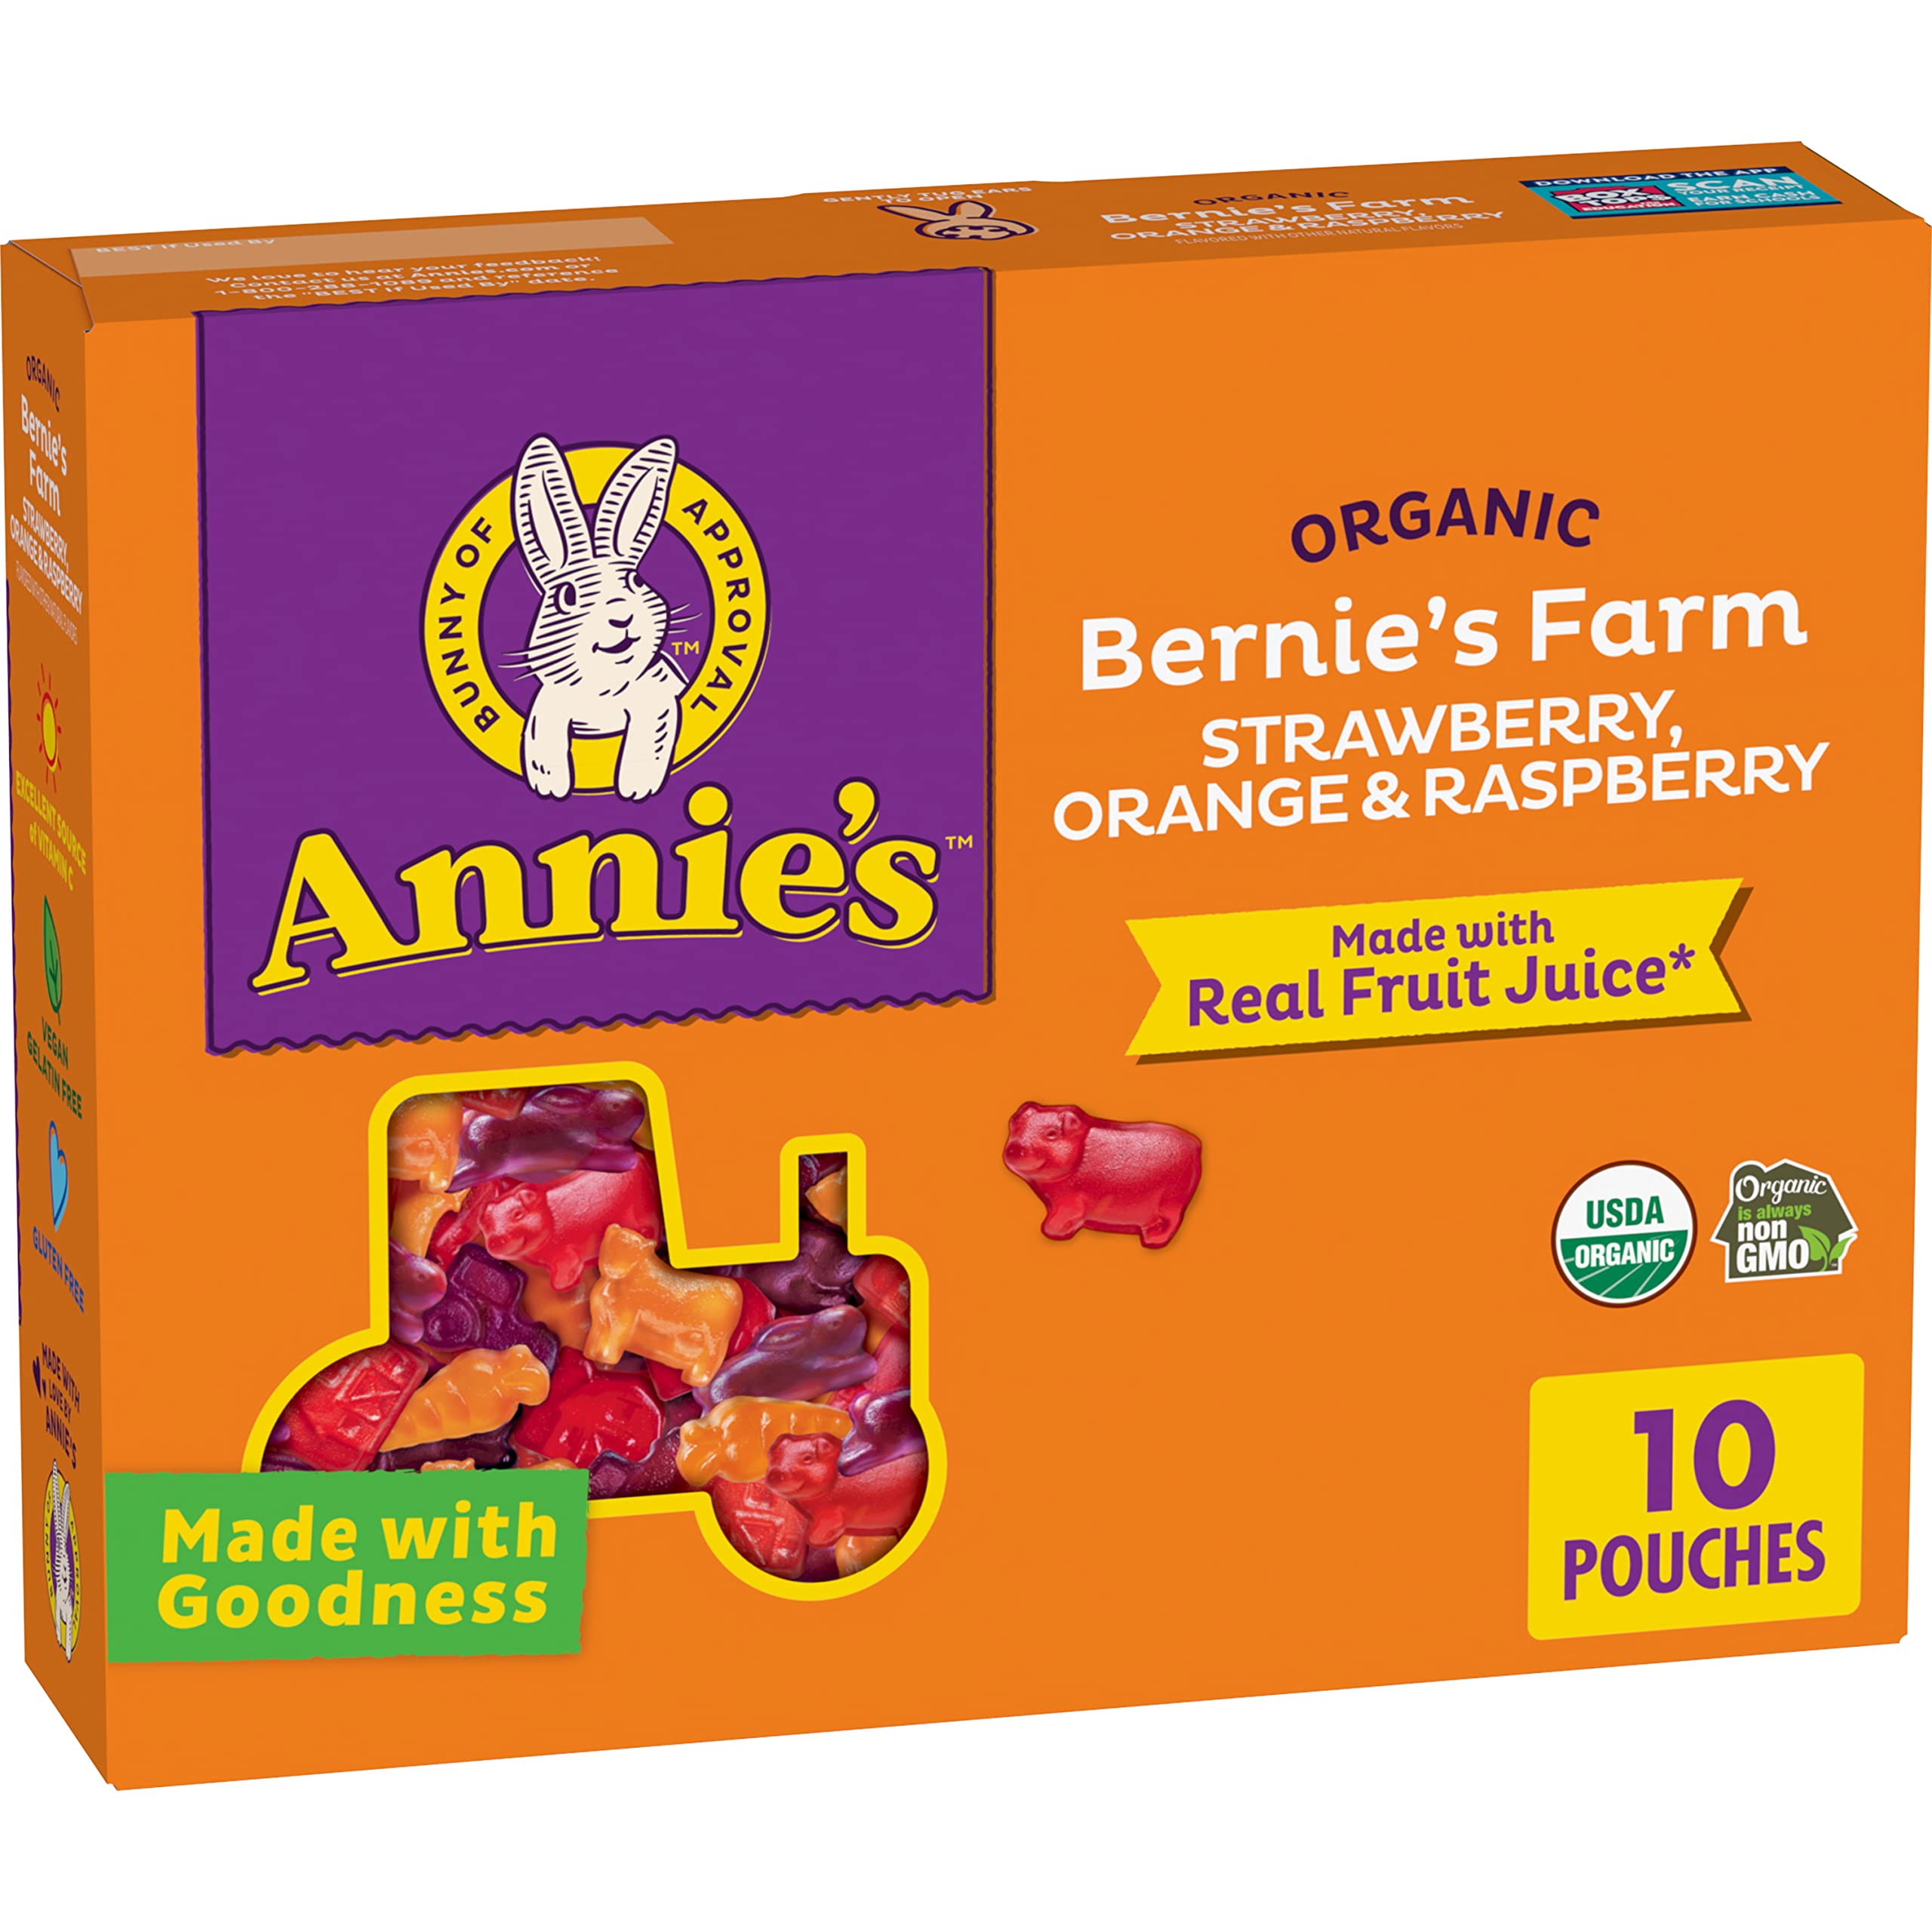 10-Pouches Annie's Organic Bernie's Farm Fruit Flavored Snacks $3.37 w/ S&S + Free Shipping w/ Prime or on $35+